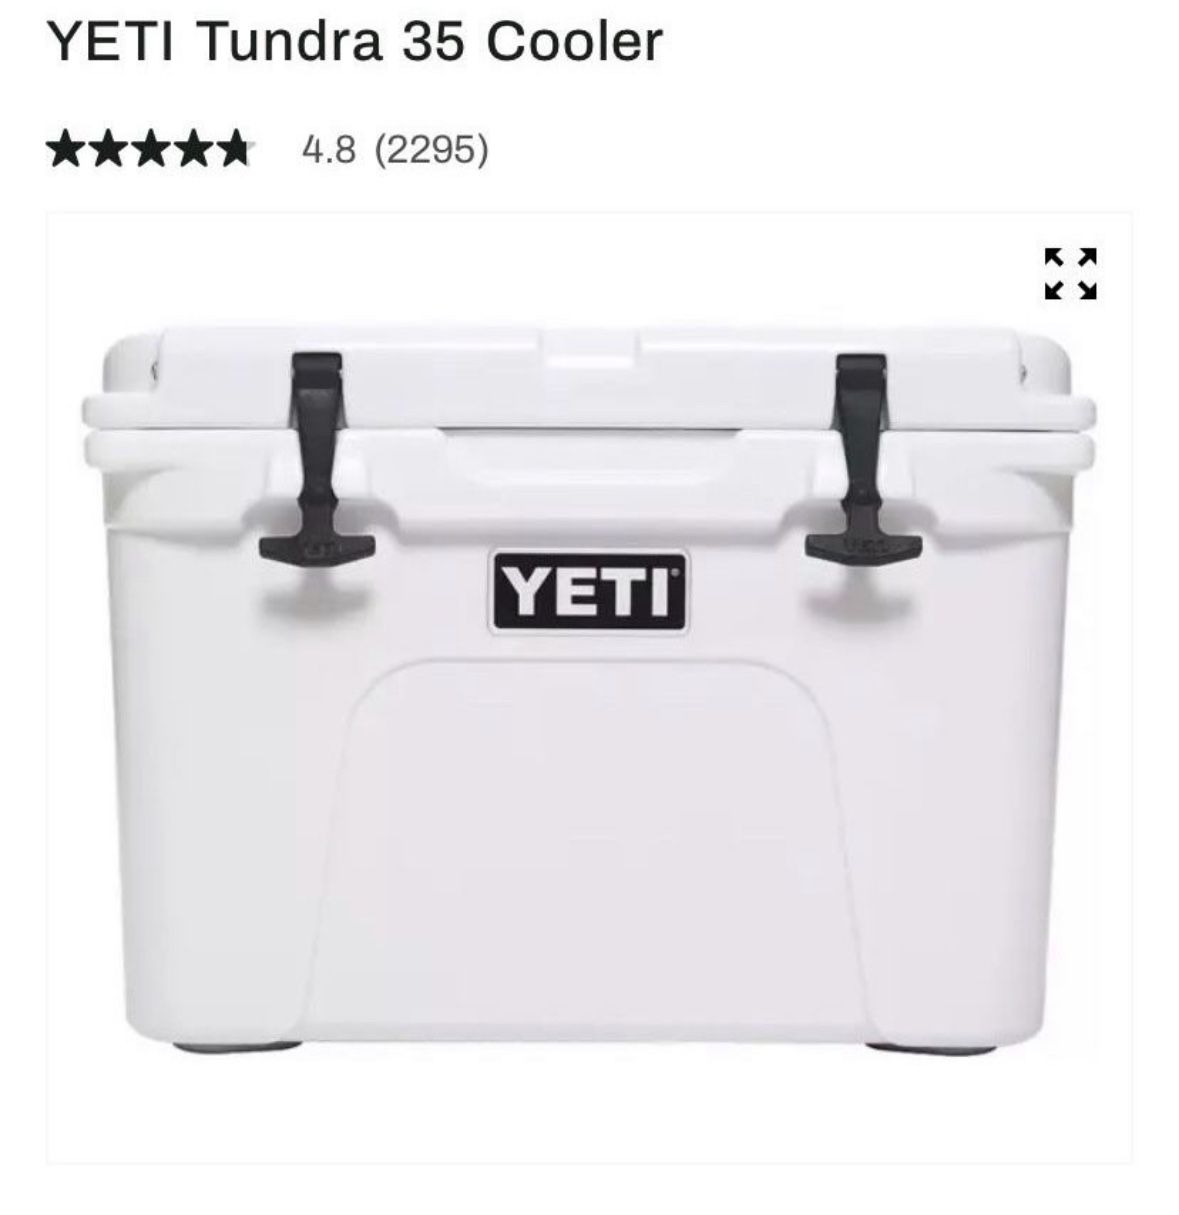 YETI TUNDRA 35 COOLER BRAND NEW NEVER USED WITH TAGS $200 OBO